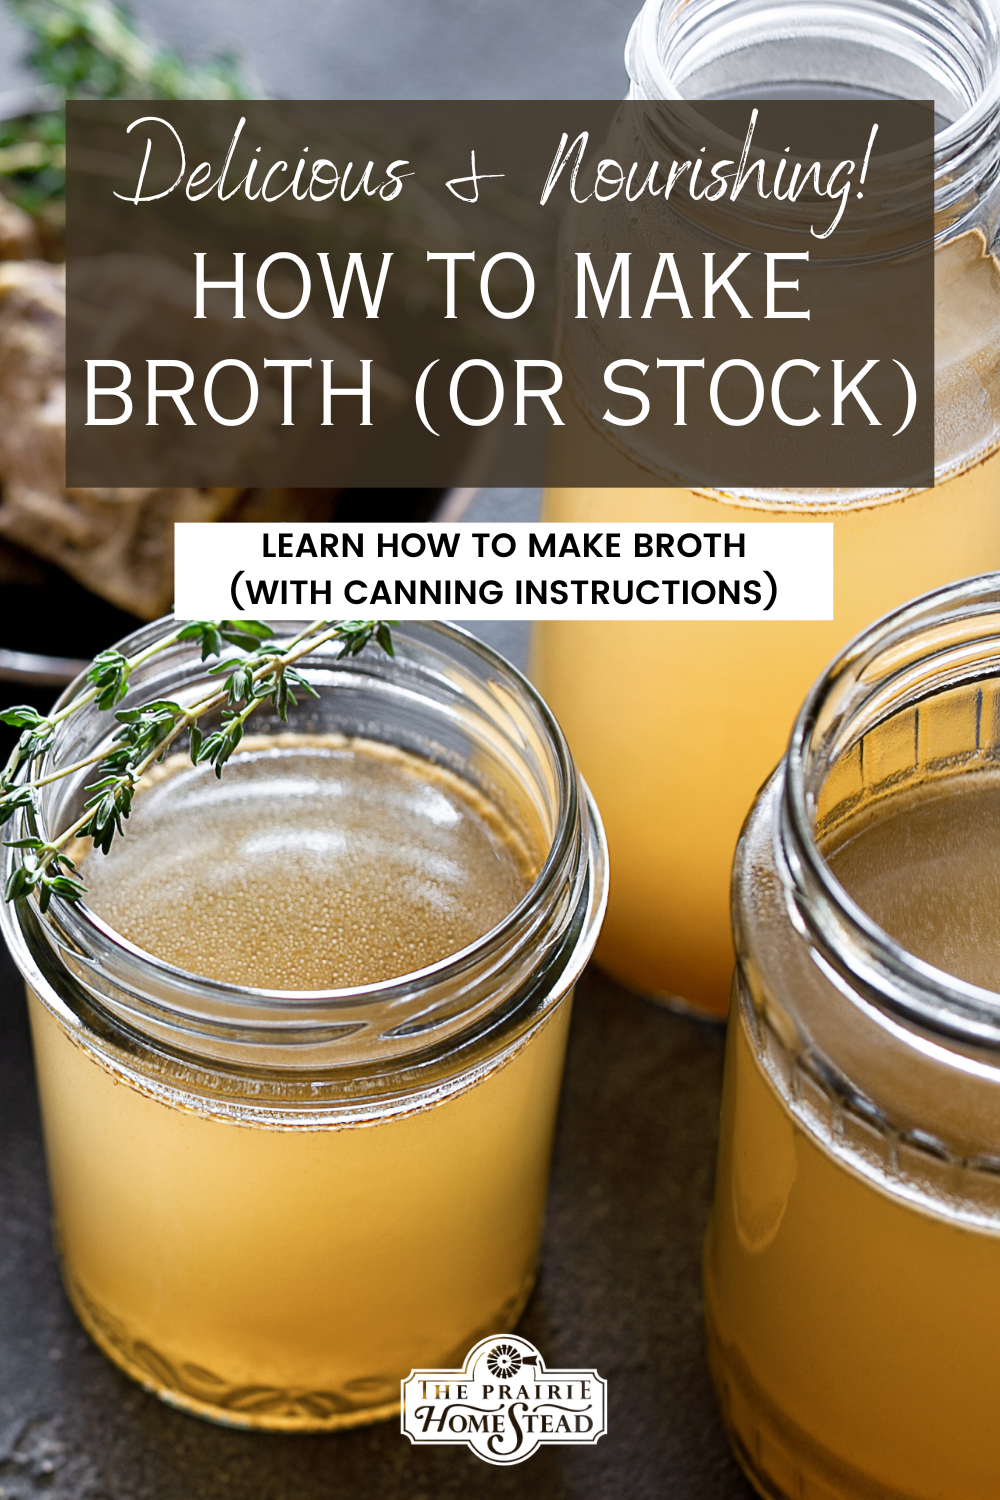 How to Make Broth (with Canning Instructions)